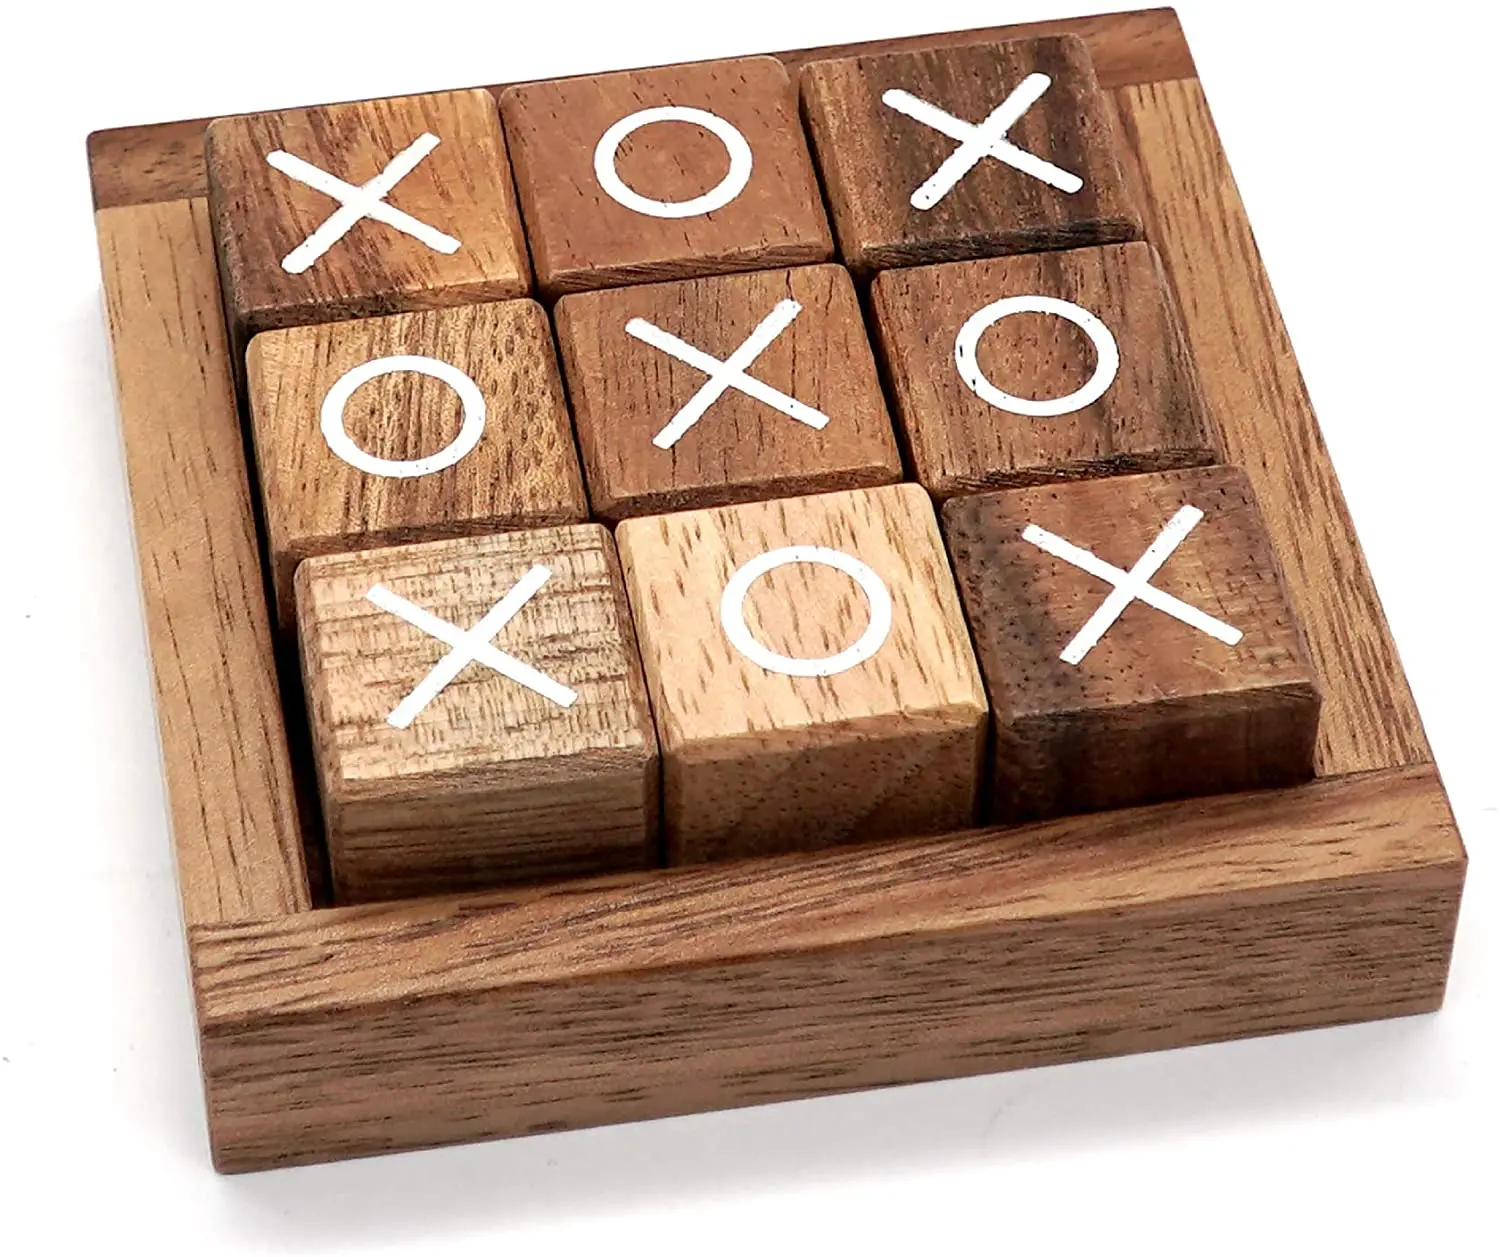 Buy Wood Tic Tac Toe - Coffee Table Puzzle (5x5) Living Room Game